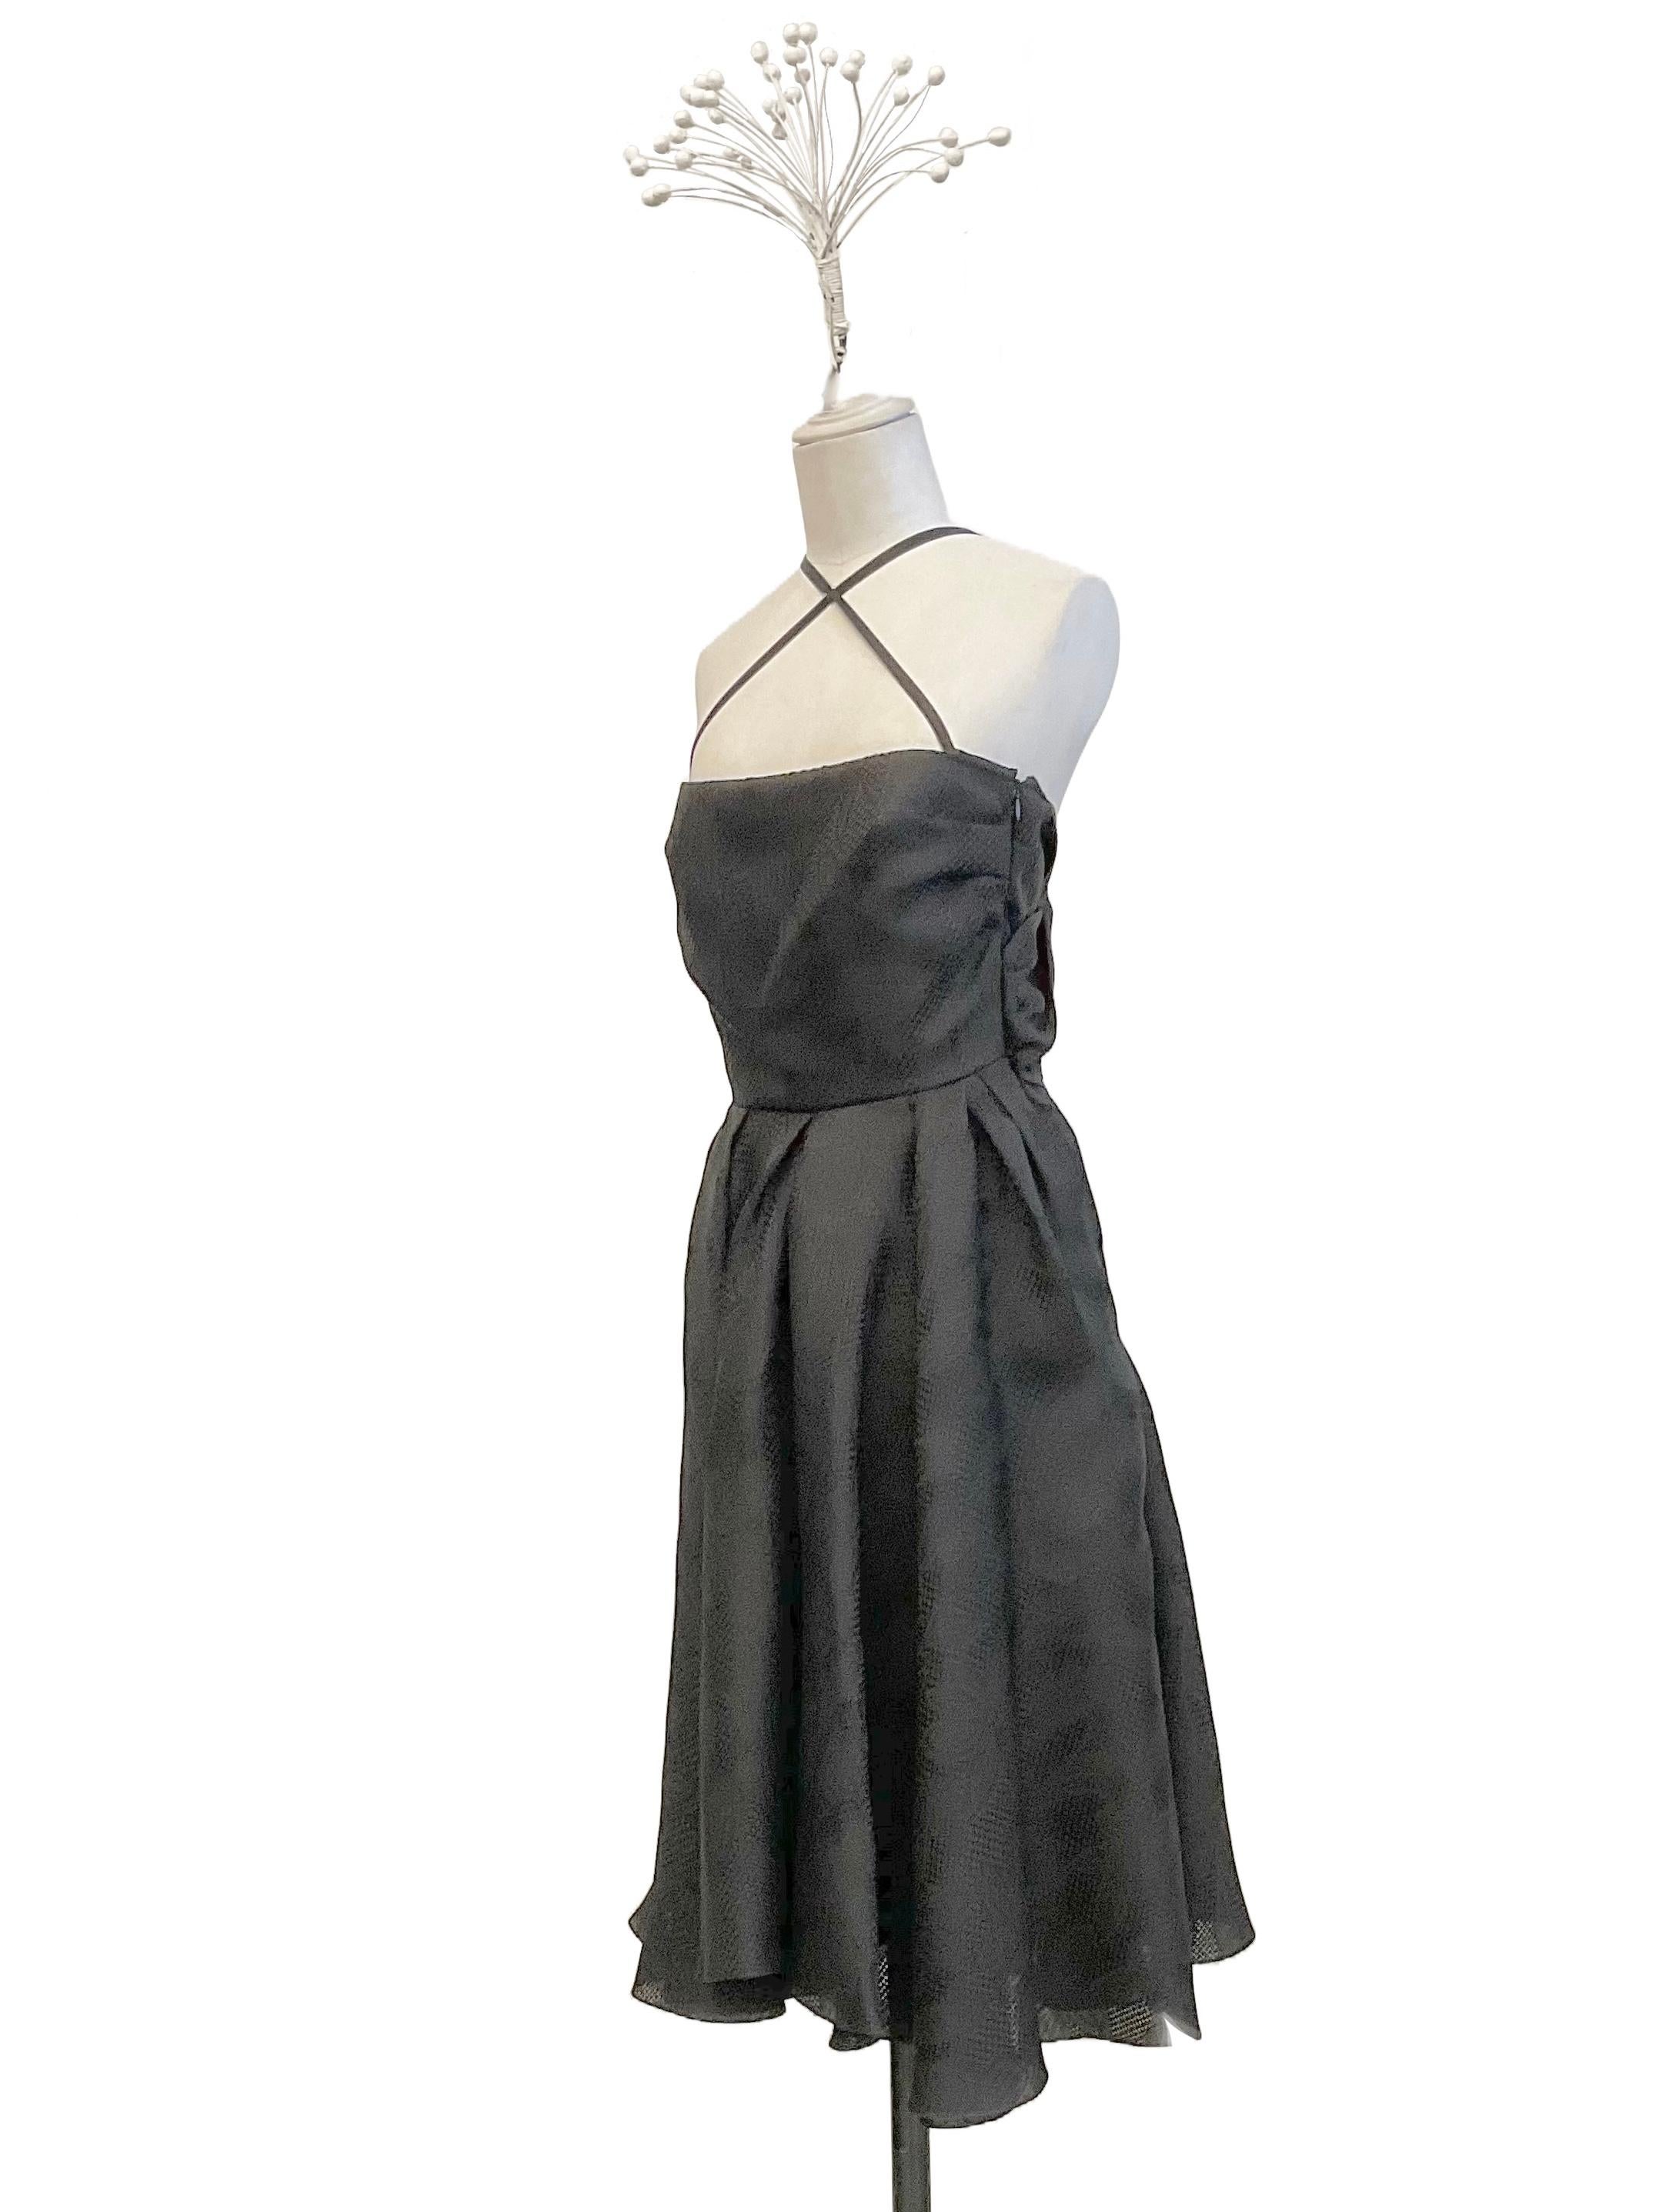 Black cocktail dress by John Galliano from the Ready to Wear Spring Summer 2008 collection. 
The fabric of the dress is a 100% silk jacquard with floral patterns. The model has a bustier neckline with thin satin ribbons crisscrossing at the front